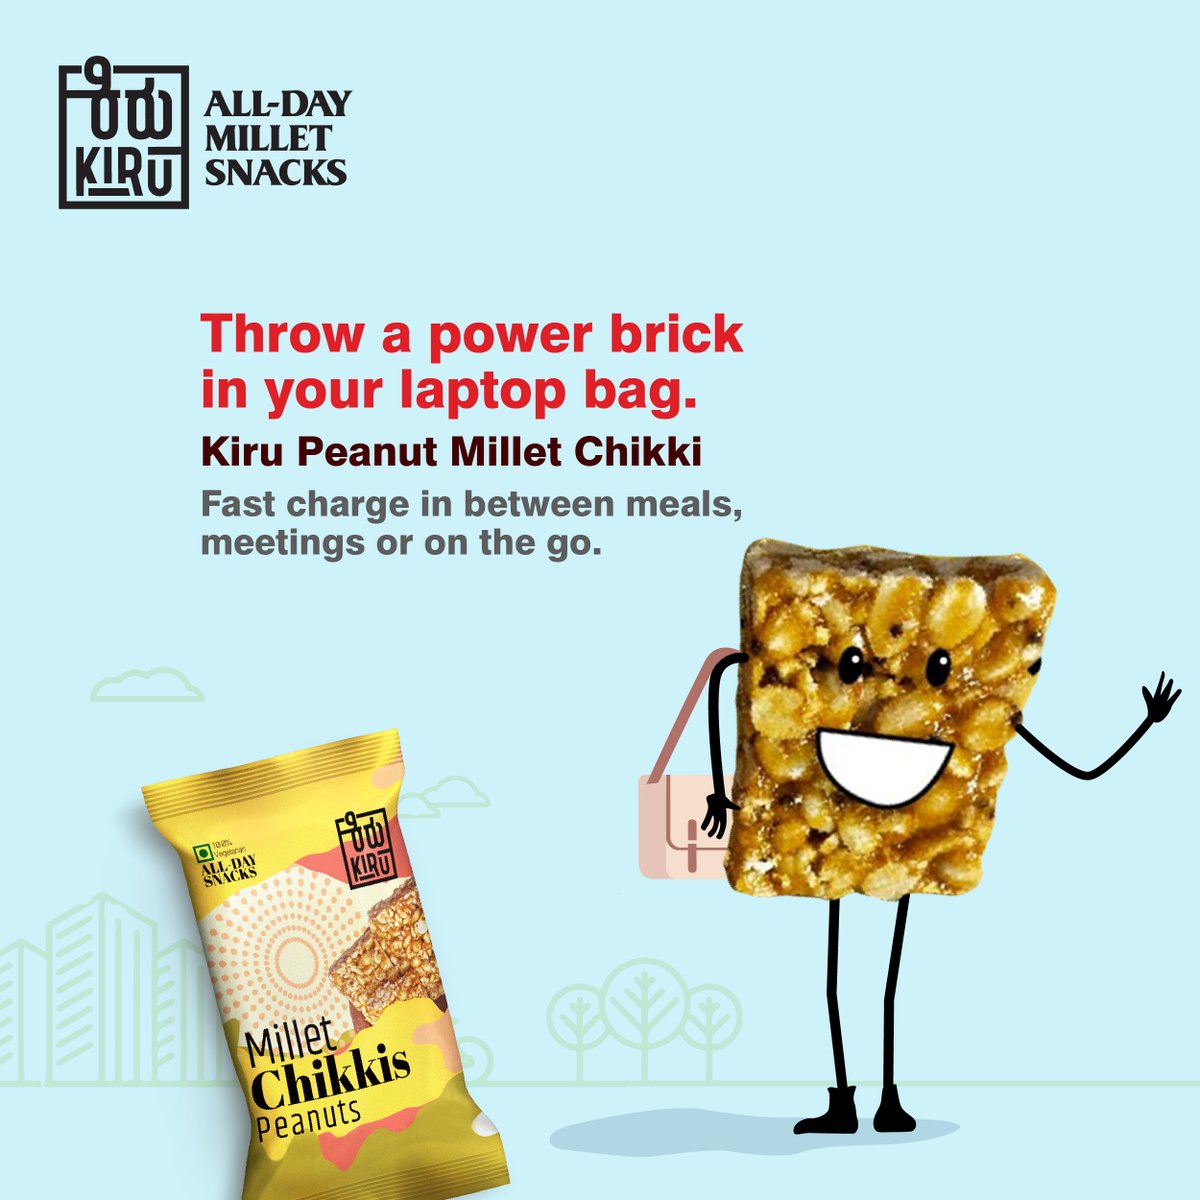 Don’t leave home without your personal fast charger. Kiru Peanut Millet Chikkis energizes and keeps you hunger free for longer.

Shop on: kiru.store or amzn.to/30VvksO

#Kiru #Millets #PeanutChikkis #PureJaggery #EnergyBar #SnackAllDay #SnackTime #Healthy